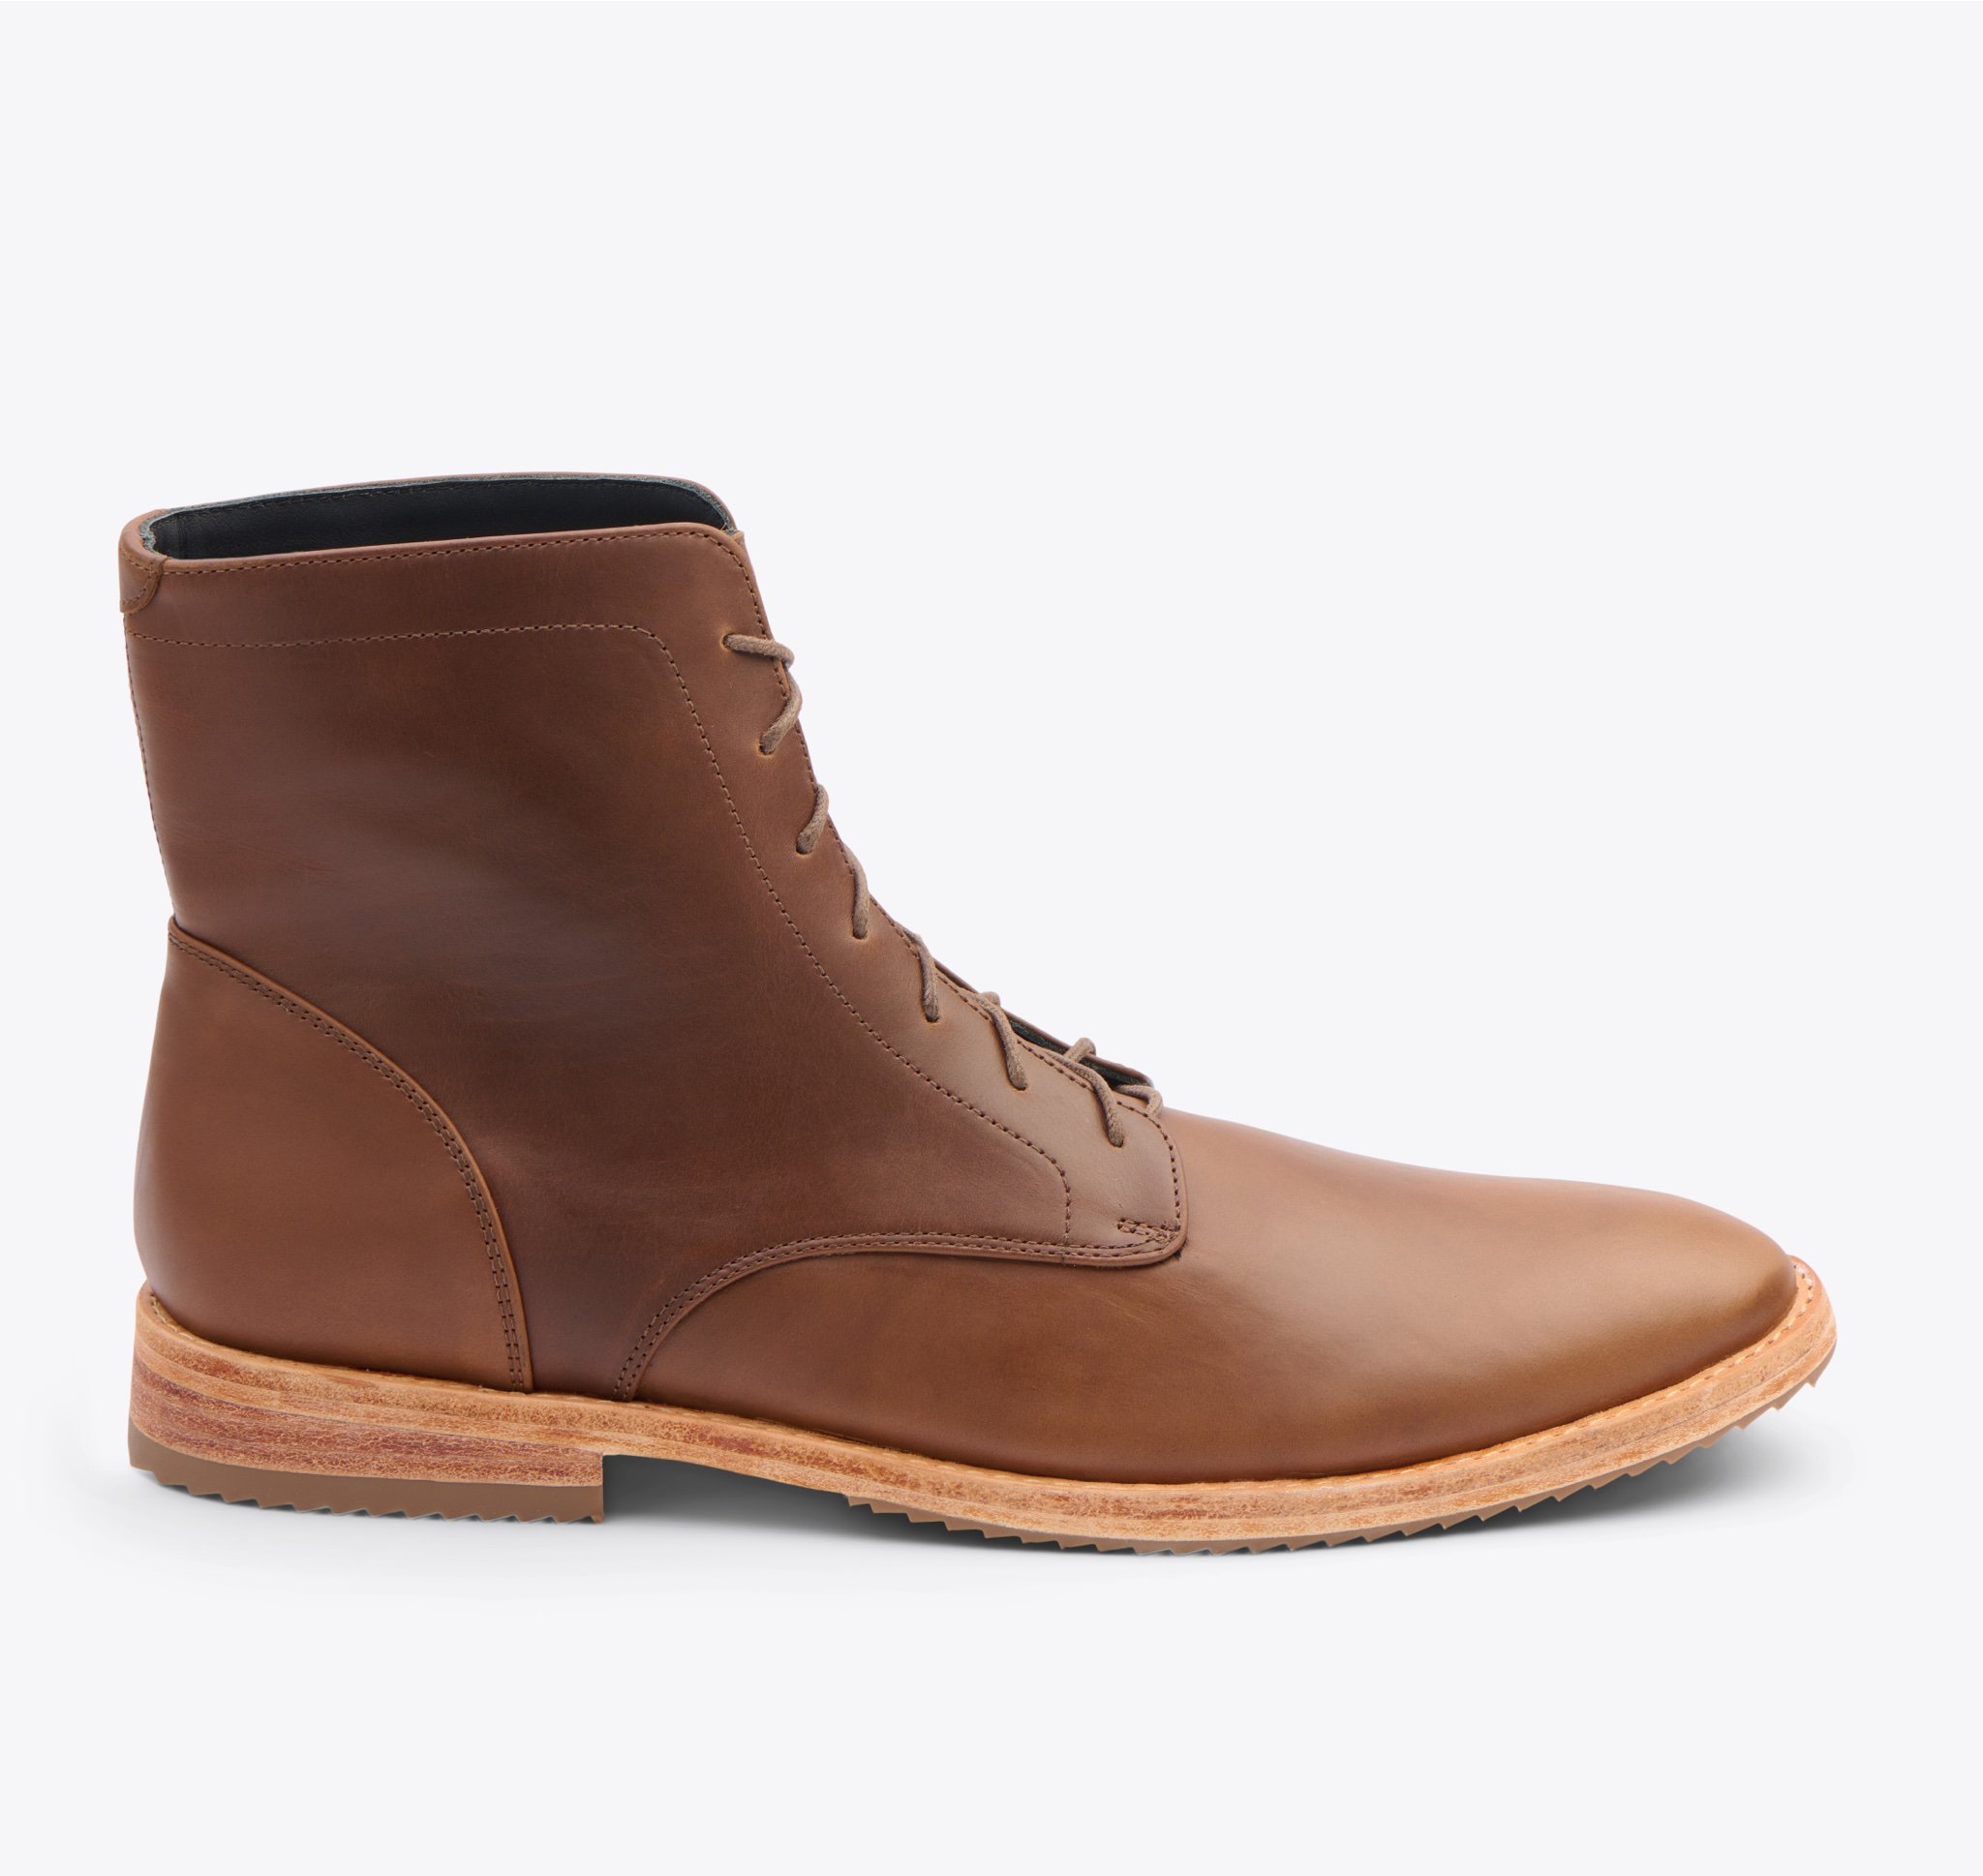 Nisolo Everyday Lace-Up Boot Brown - Every Nisolo product is built on the foundation of comfort, function, and design. 